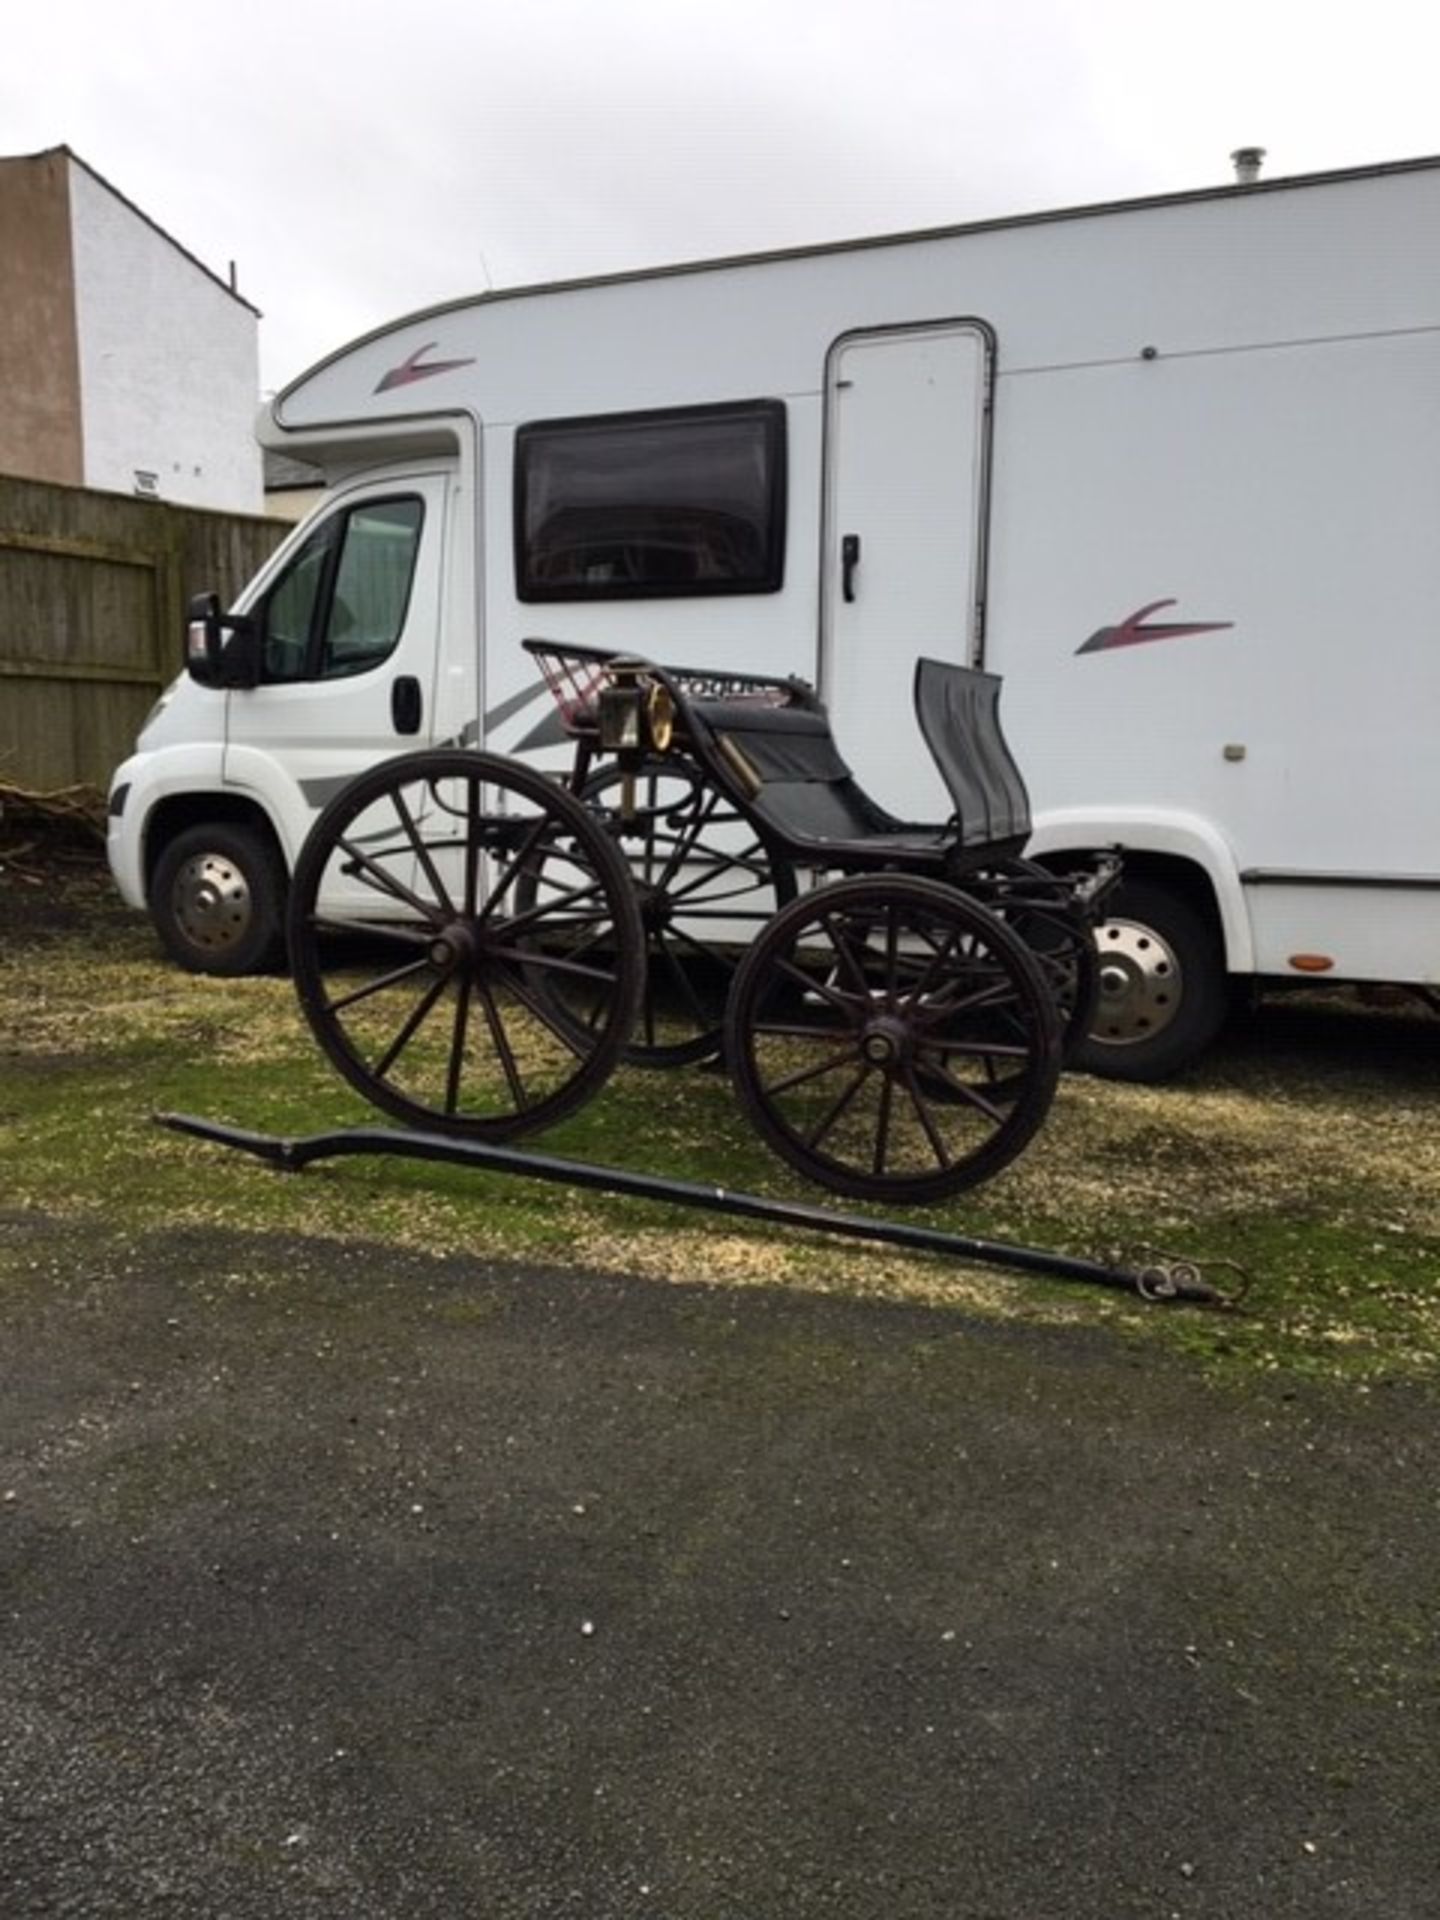 SPIDER PHAETON to suit 12 to 13hh pony. Painted black, on 12-spoke wheels with brass hub caps and e